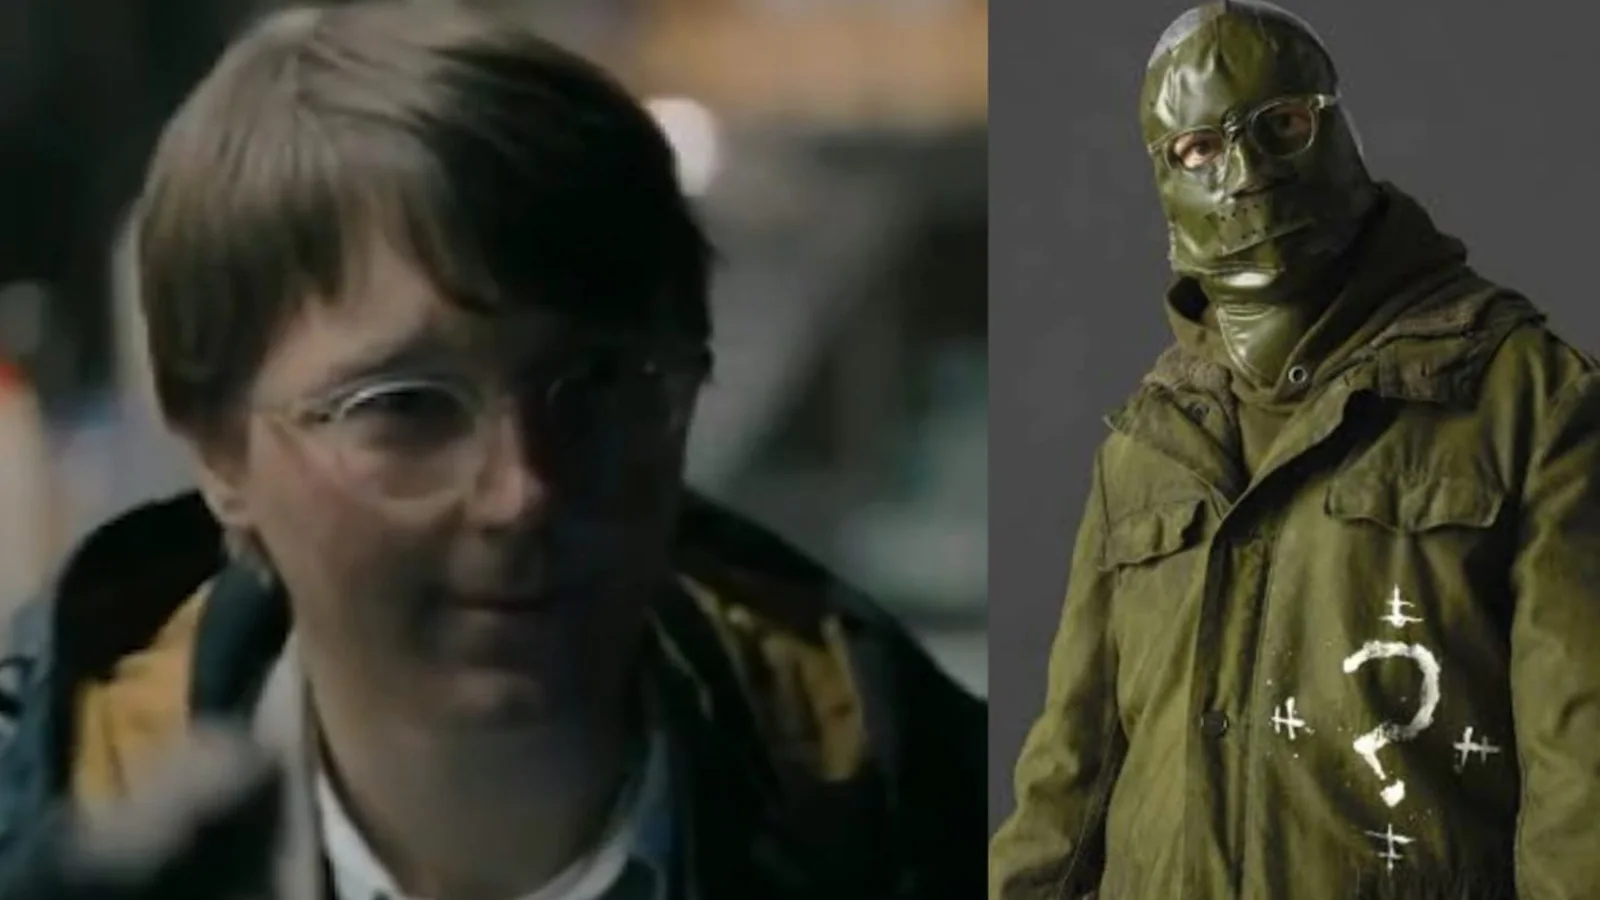 The Batman new footage gives first look at Paul Dano’s Riddler without mask. Watch